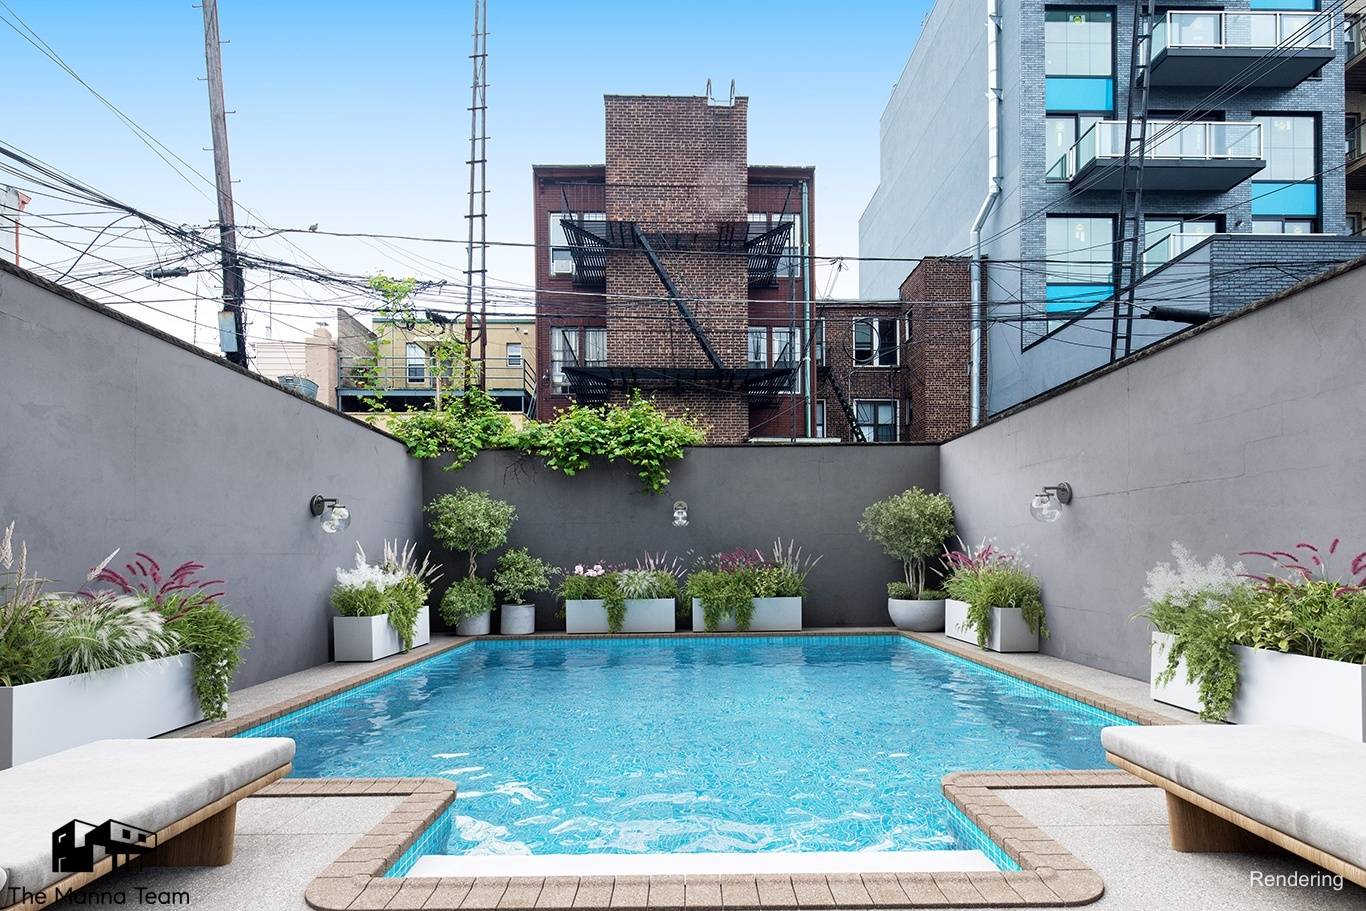 This classic Williamsburg townhouse is an outstanding opportunity for end users and investors alike, thanks to its owner's duplex, two rental units, fantastic outdoor space with in ground pool and ...